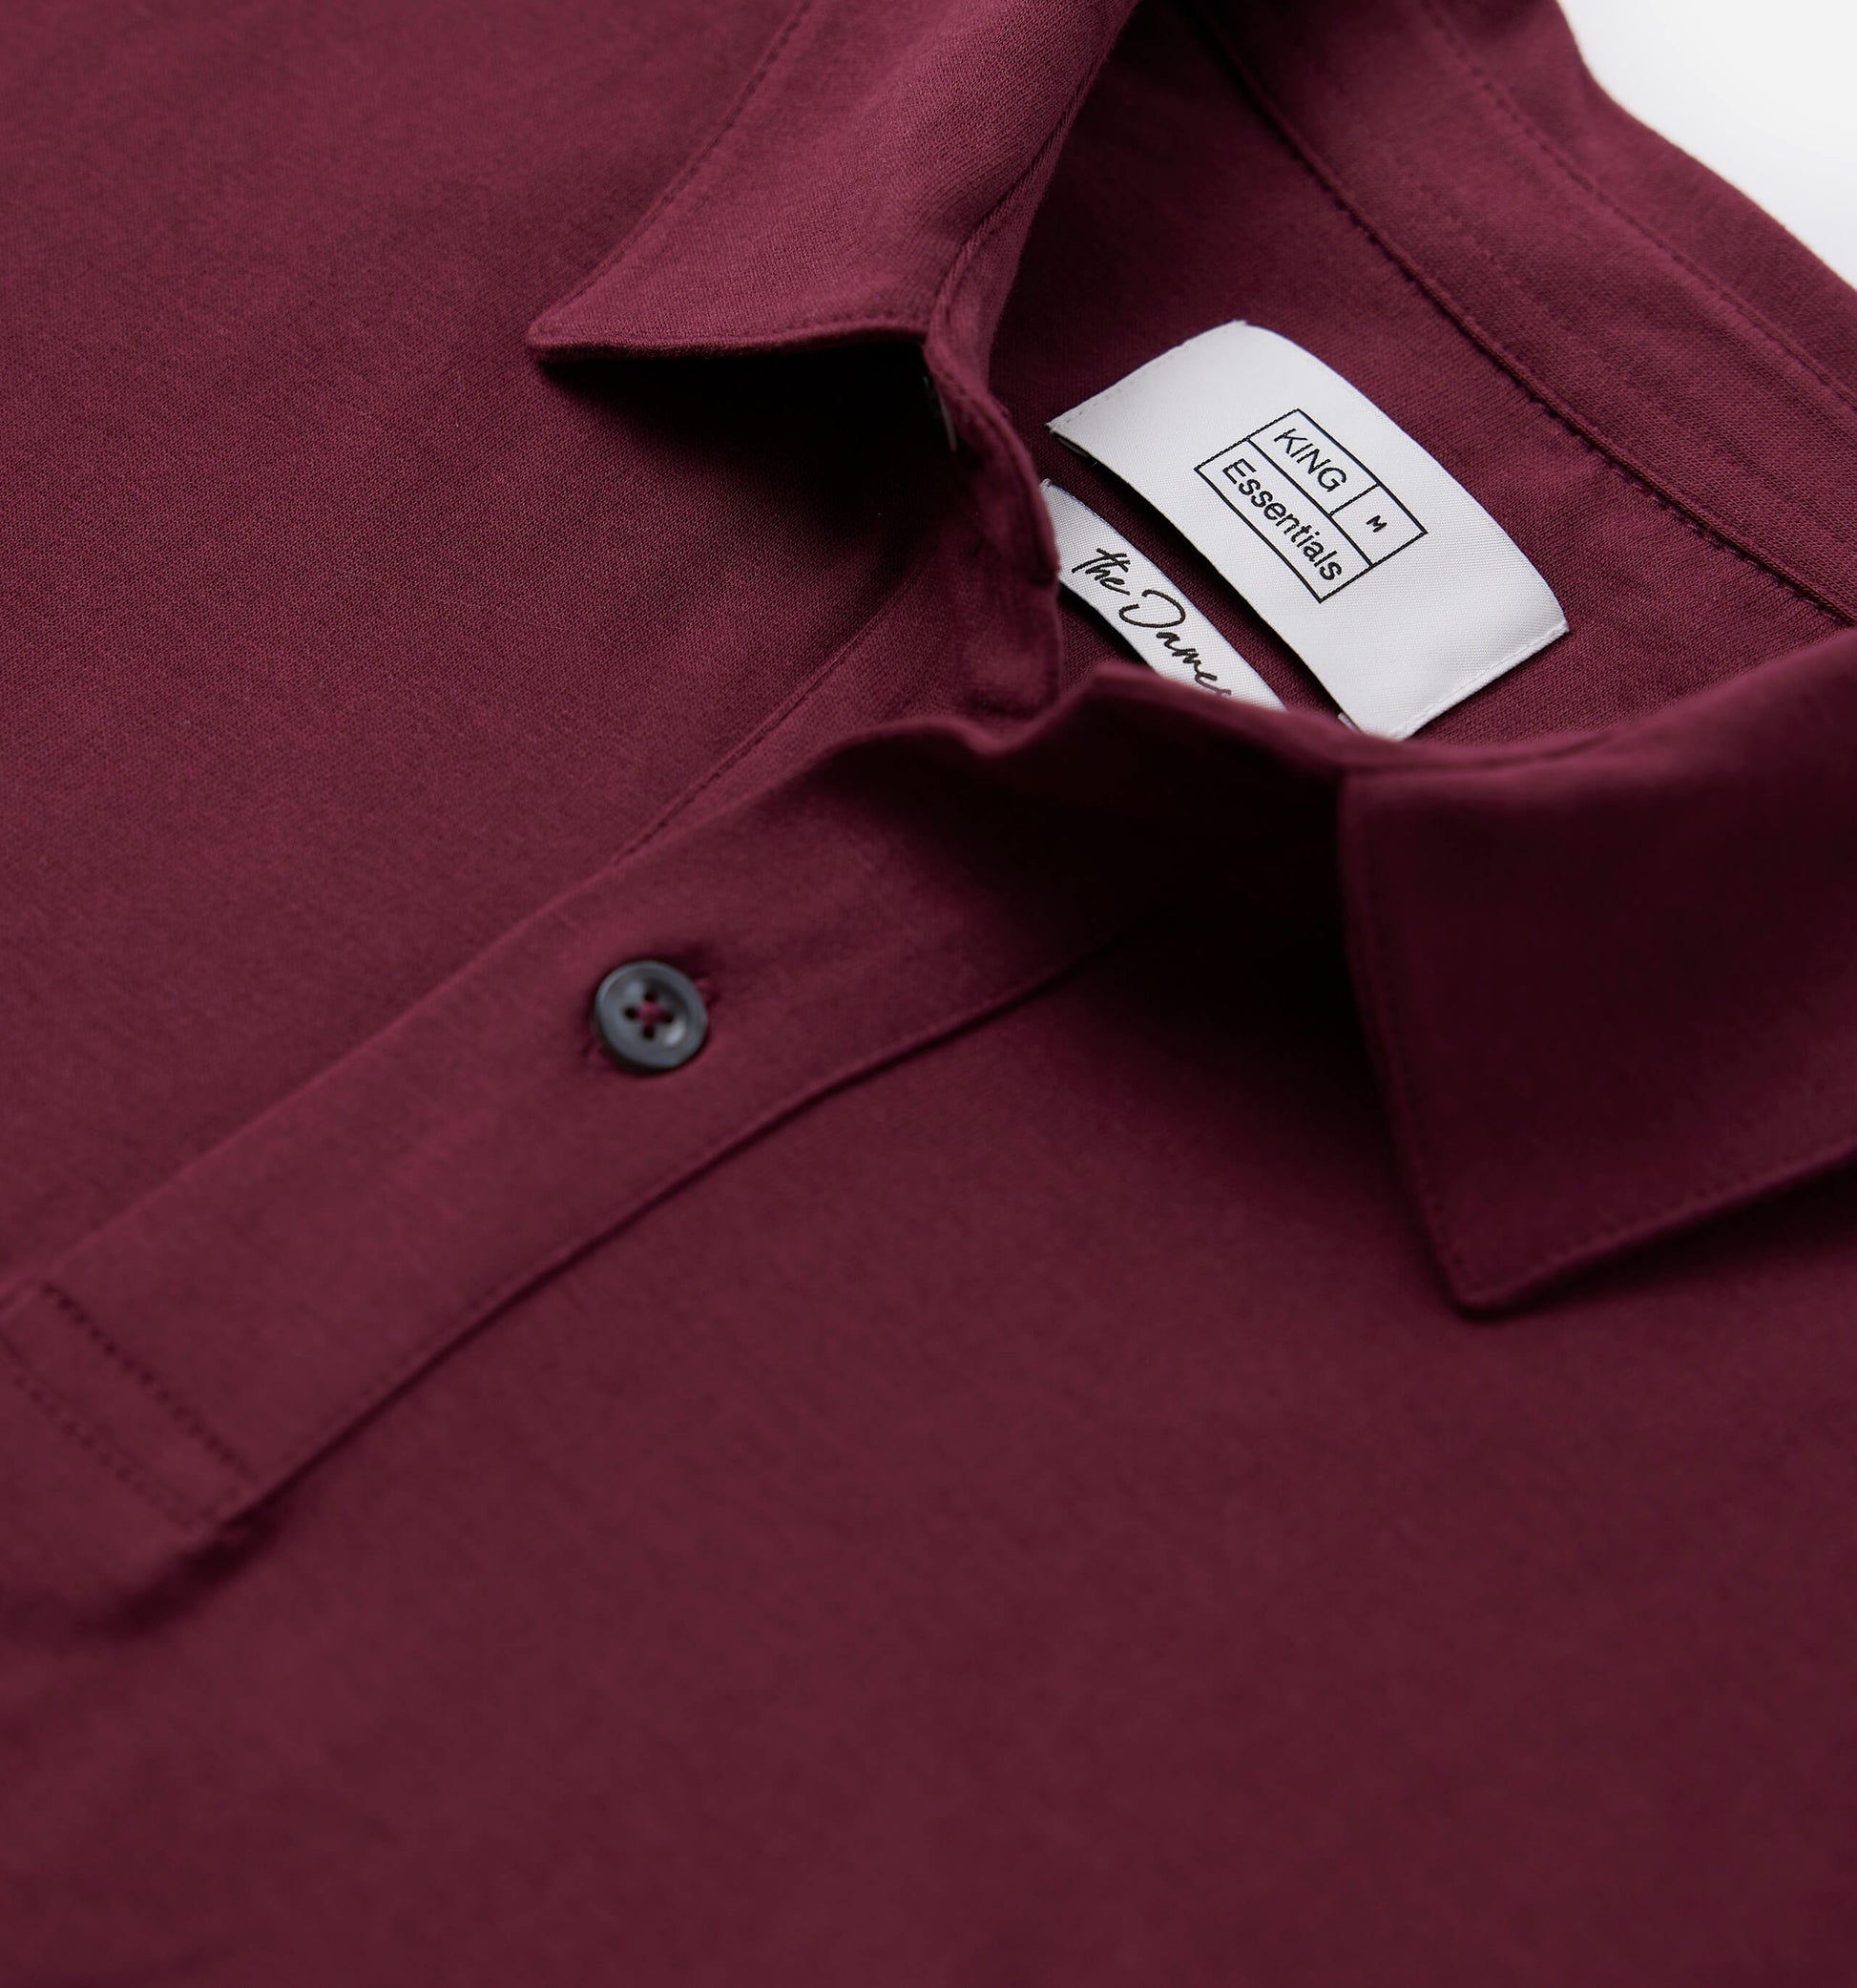 The James - Jersey Cotton Polo In Burgundy From King Essentials